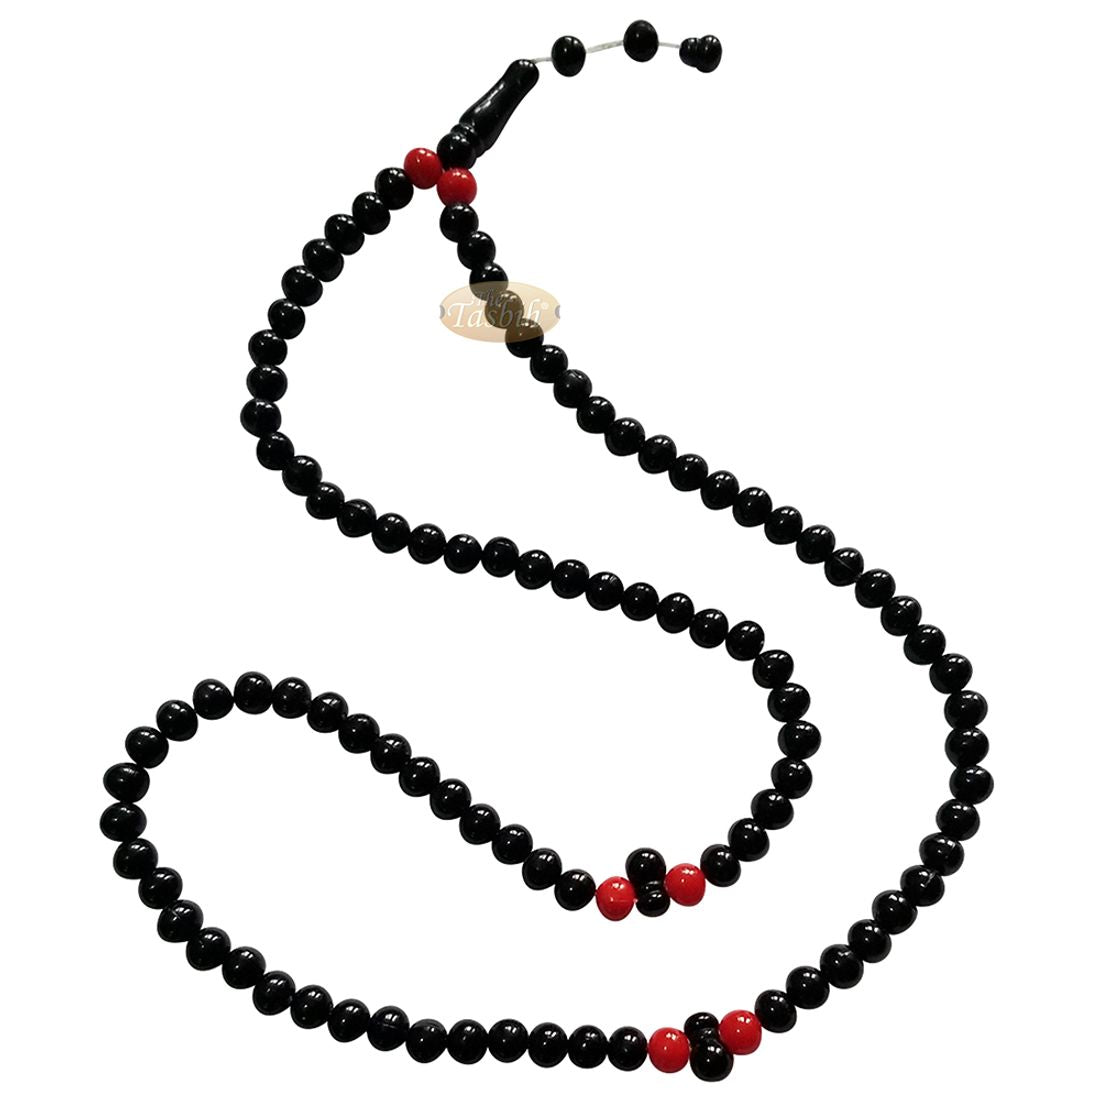 Med-size Black Plastic Sufi Tasbih 6x8mm Beads with Red Accent Beads